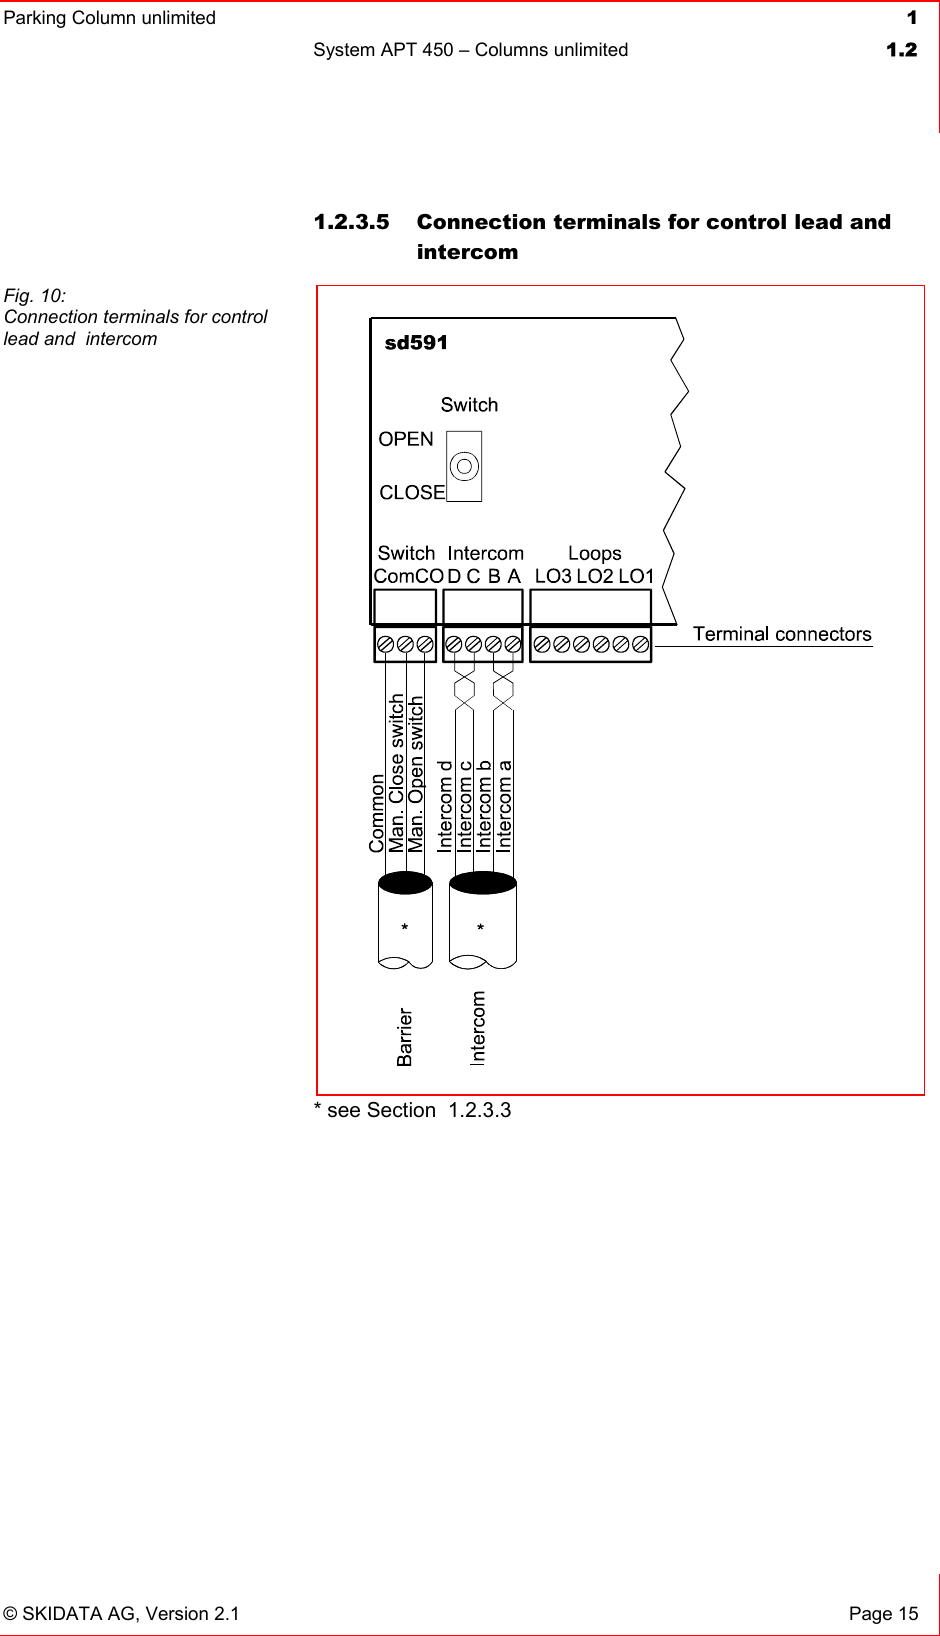 Parking Column unlimited  1System APT 450 – Columns unlimited  1.2© SKIDATA AG, Version 2.1  Page 15 1.2.3.5  Connection terminals for control lead and intercom* see Section  1.2.3.3 Fig. 10: Connection terminals for control lead and  intercom